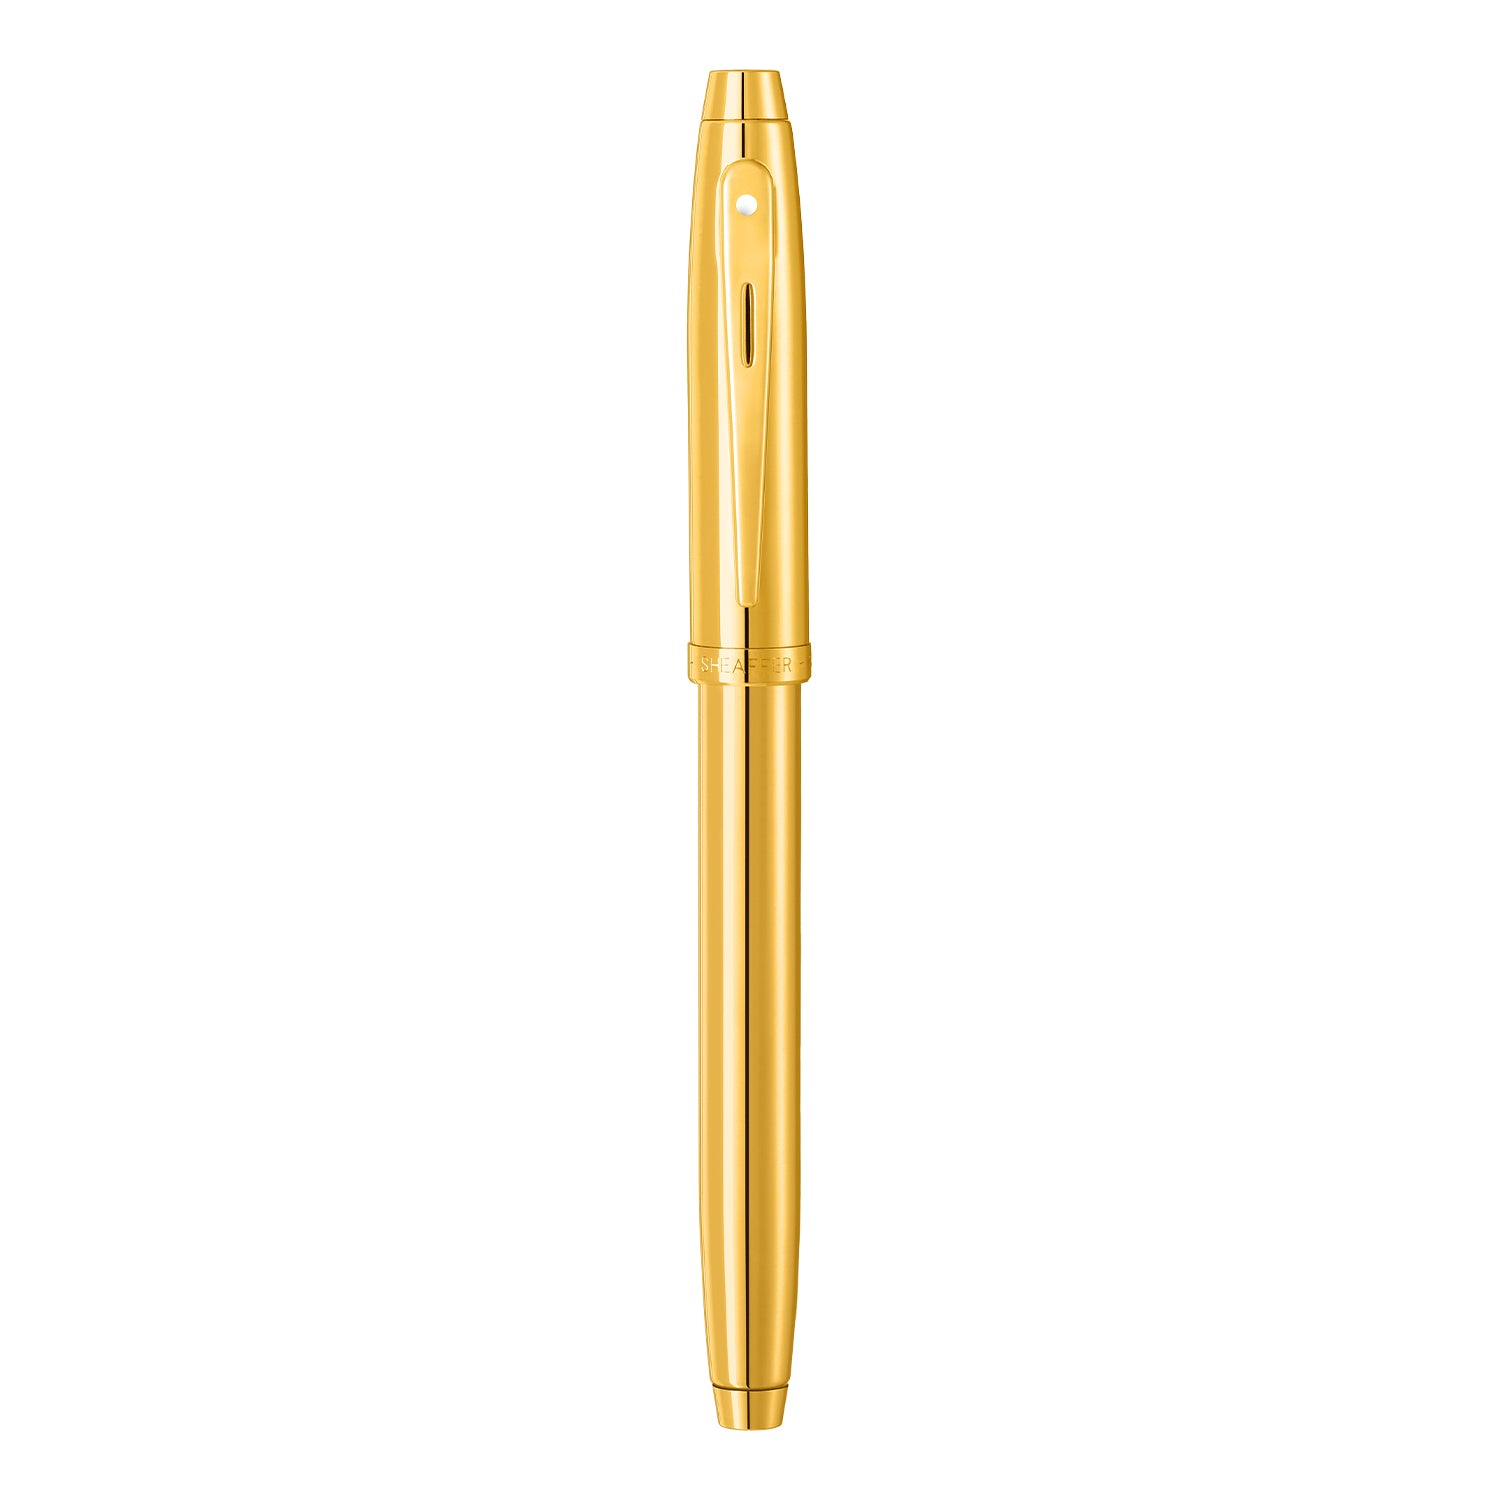 Sheaffer® 100 9372 Glossy PVD Gold Fountain Pen With PVD Gold Trim - Medium